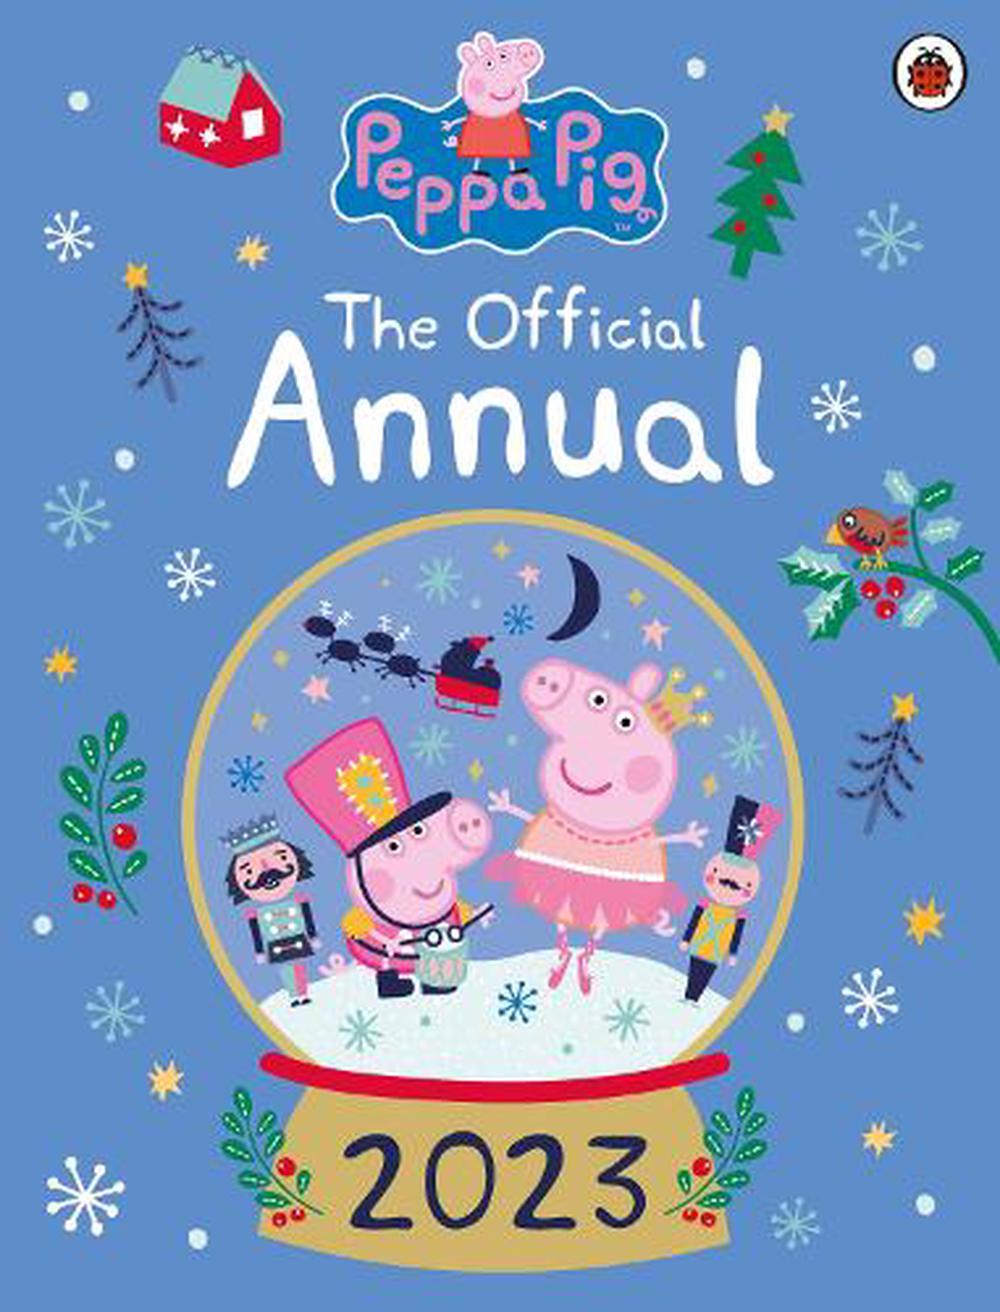 Peppa Pig The Official Annual 2023 by Peppa Pig, Hardcover